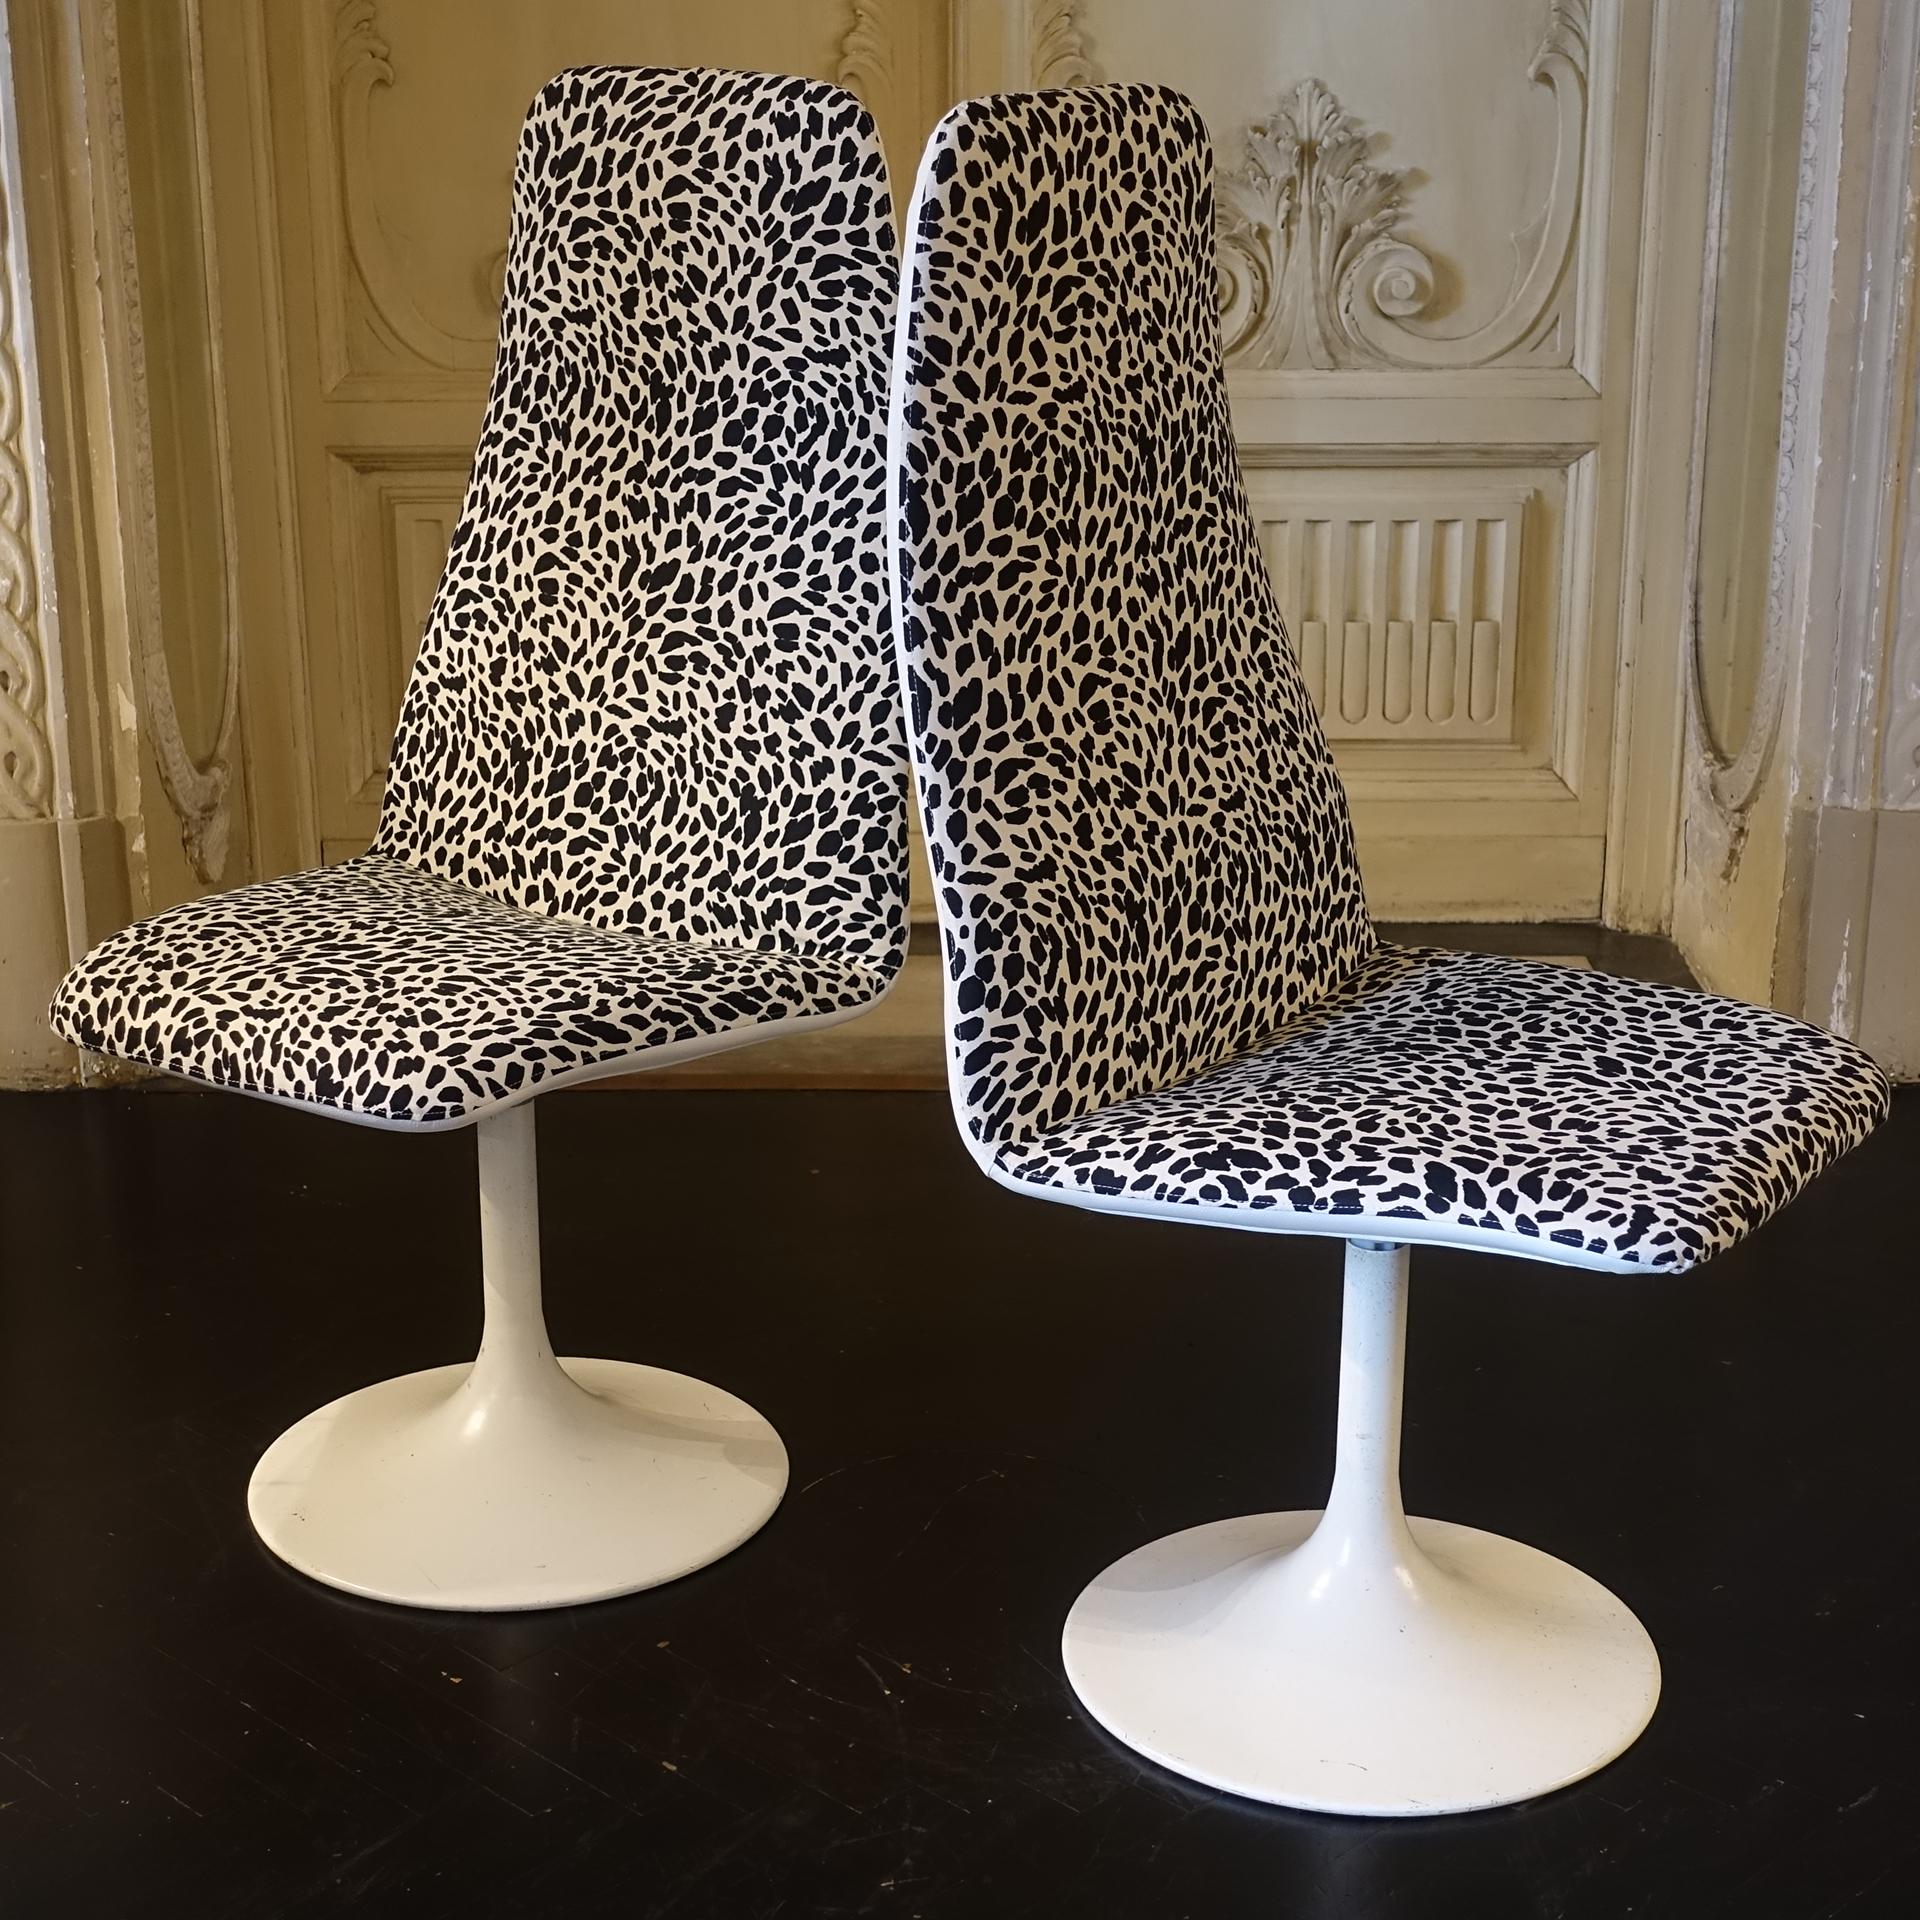 Pair of tall swivel armchairs with white metal tulip shape base, newly upholstered in black and white print fabric and white leather, vintage patina, Italy, circa 1960s.
 